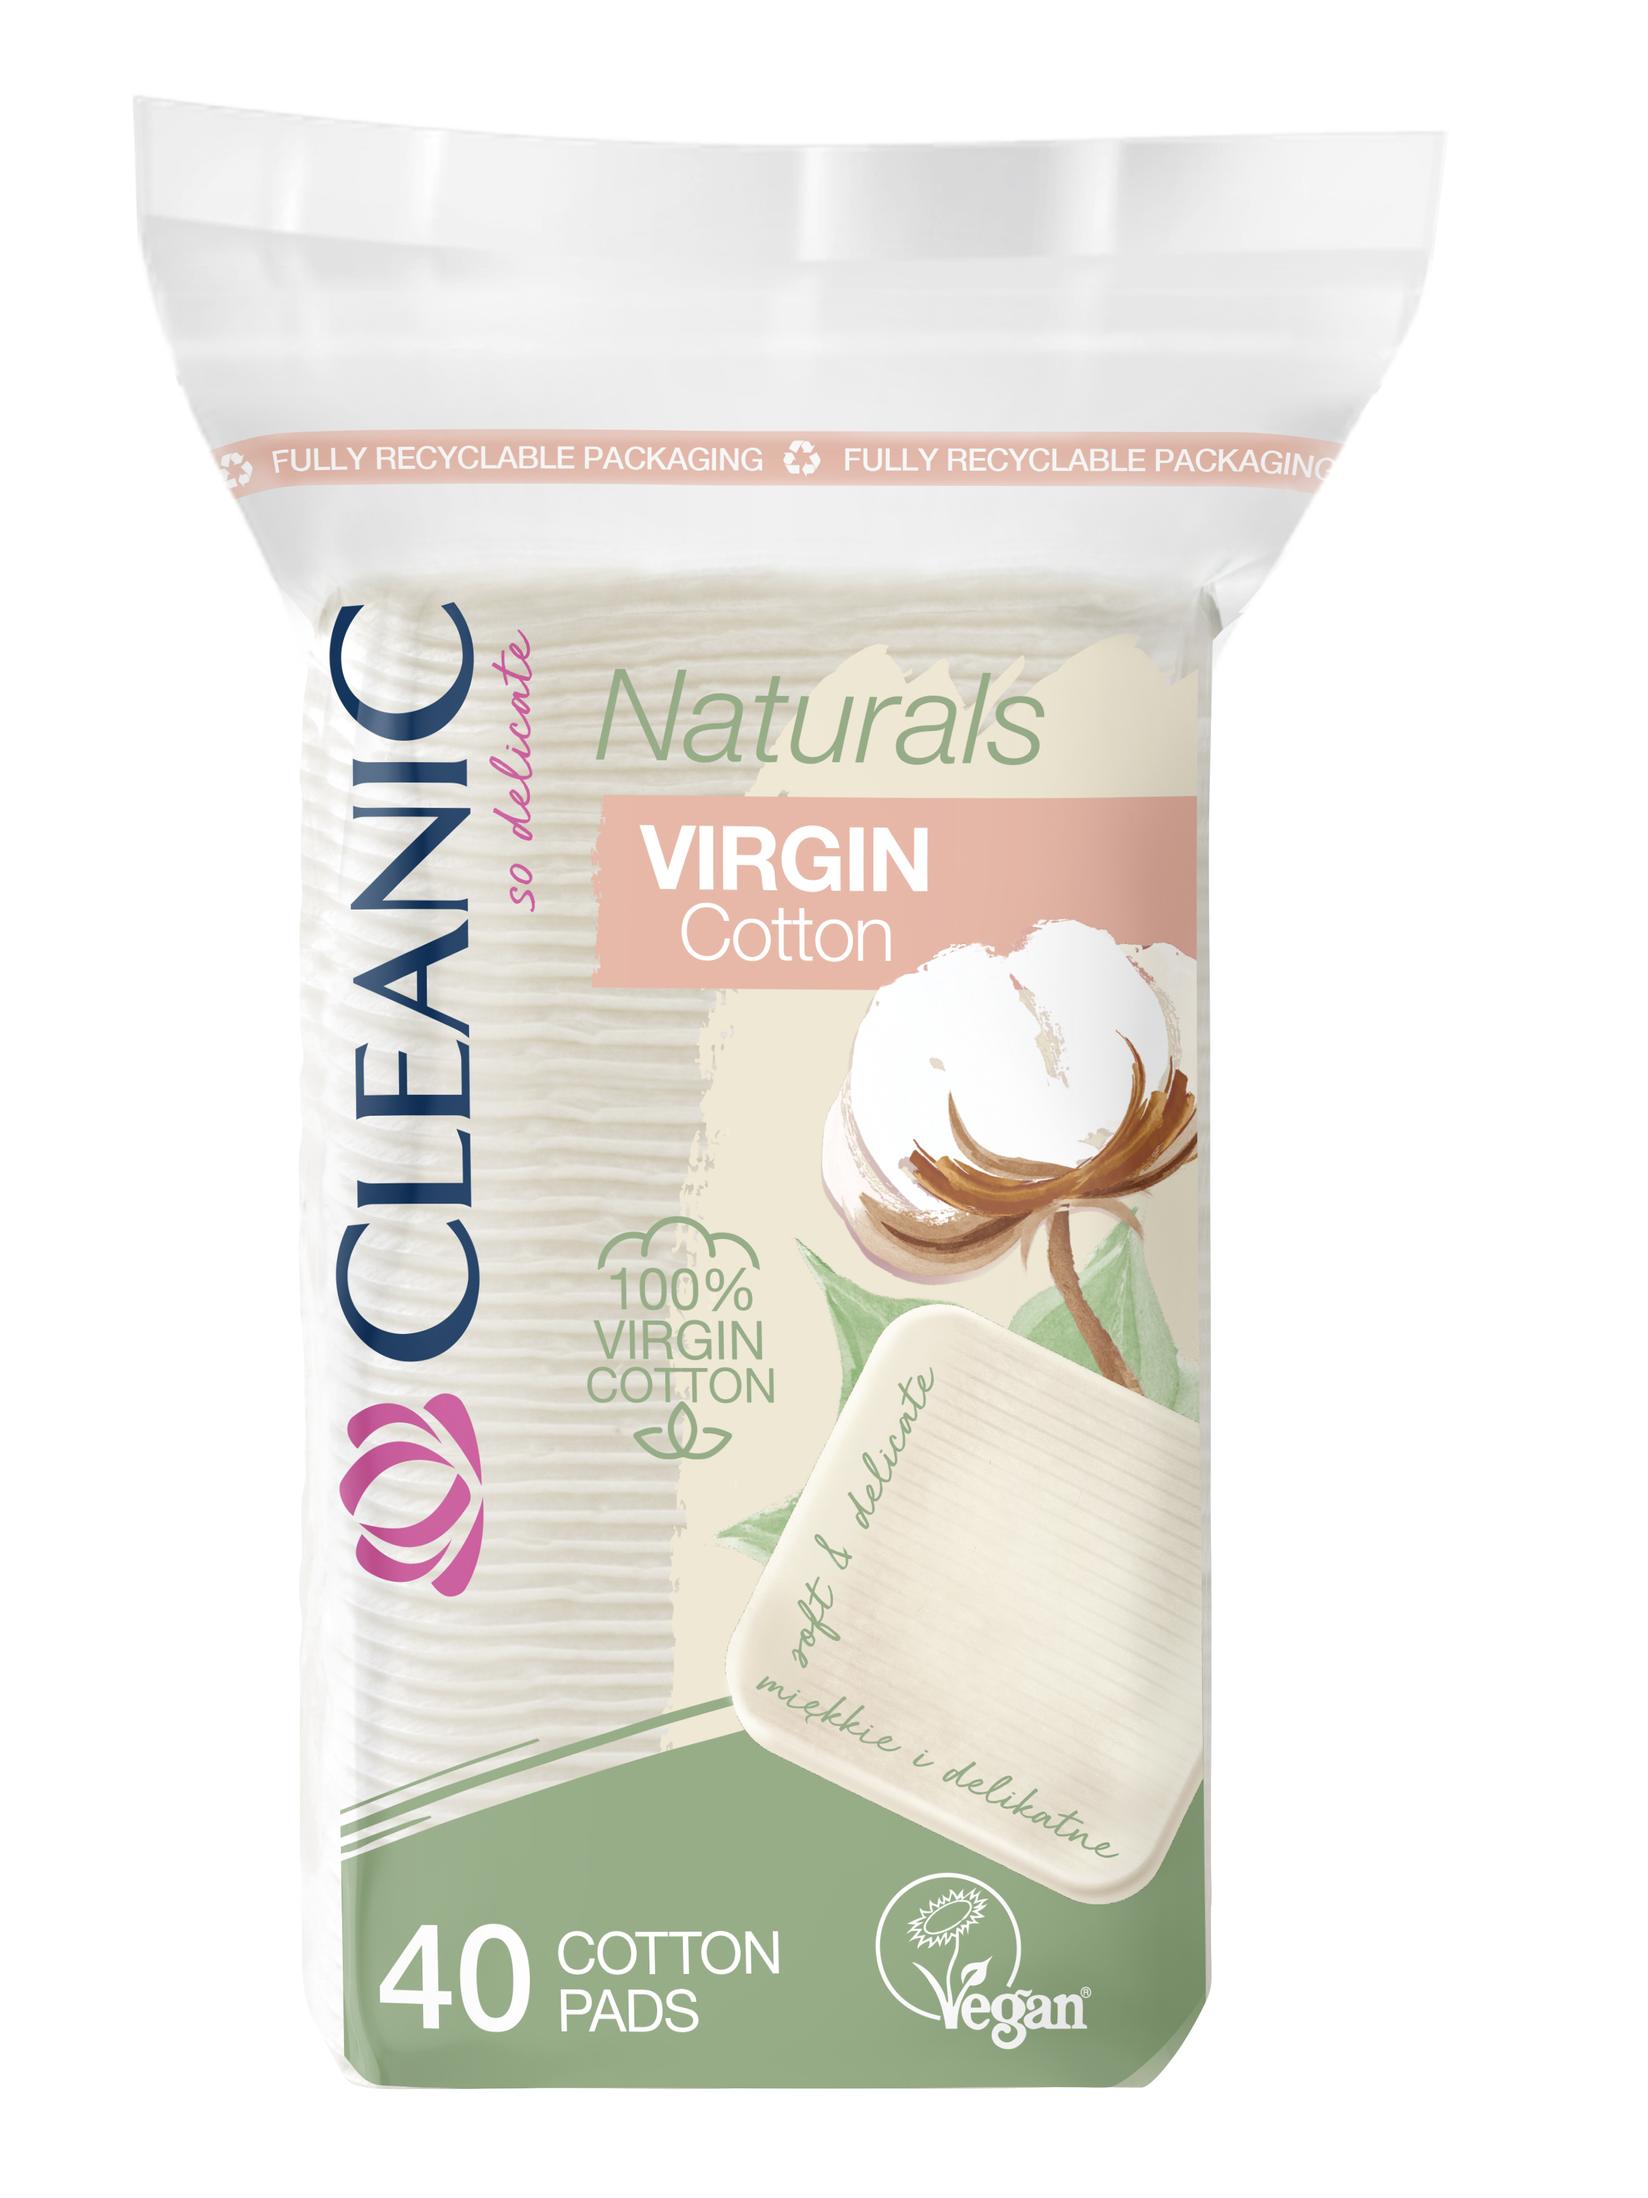 Selected image for CLEANIC Blazinice Naturals Virgin 40 komada